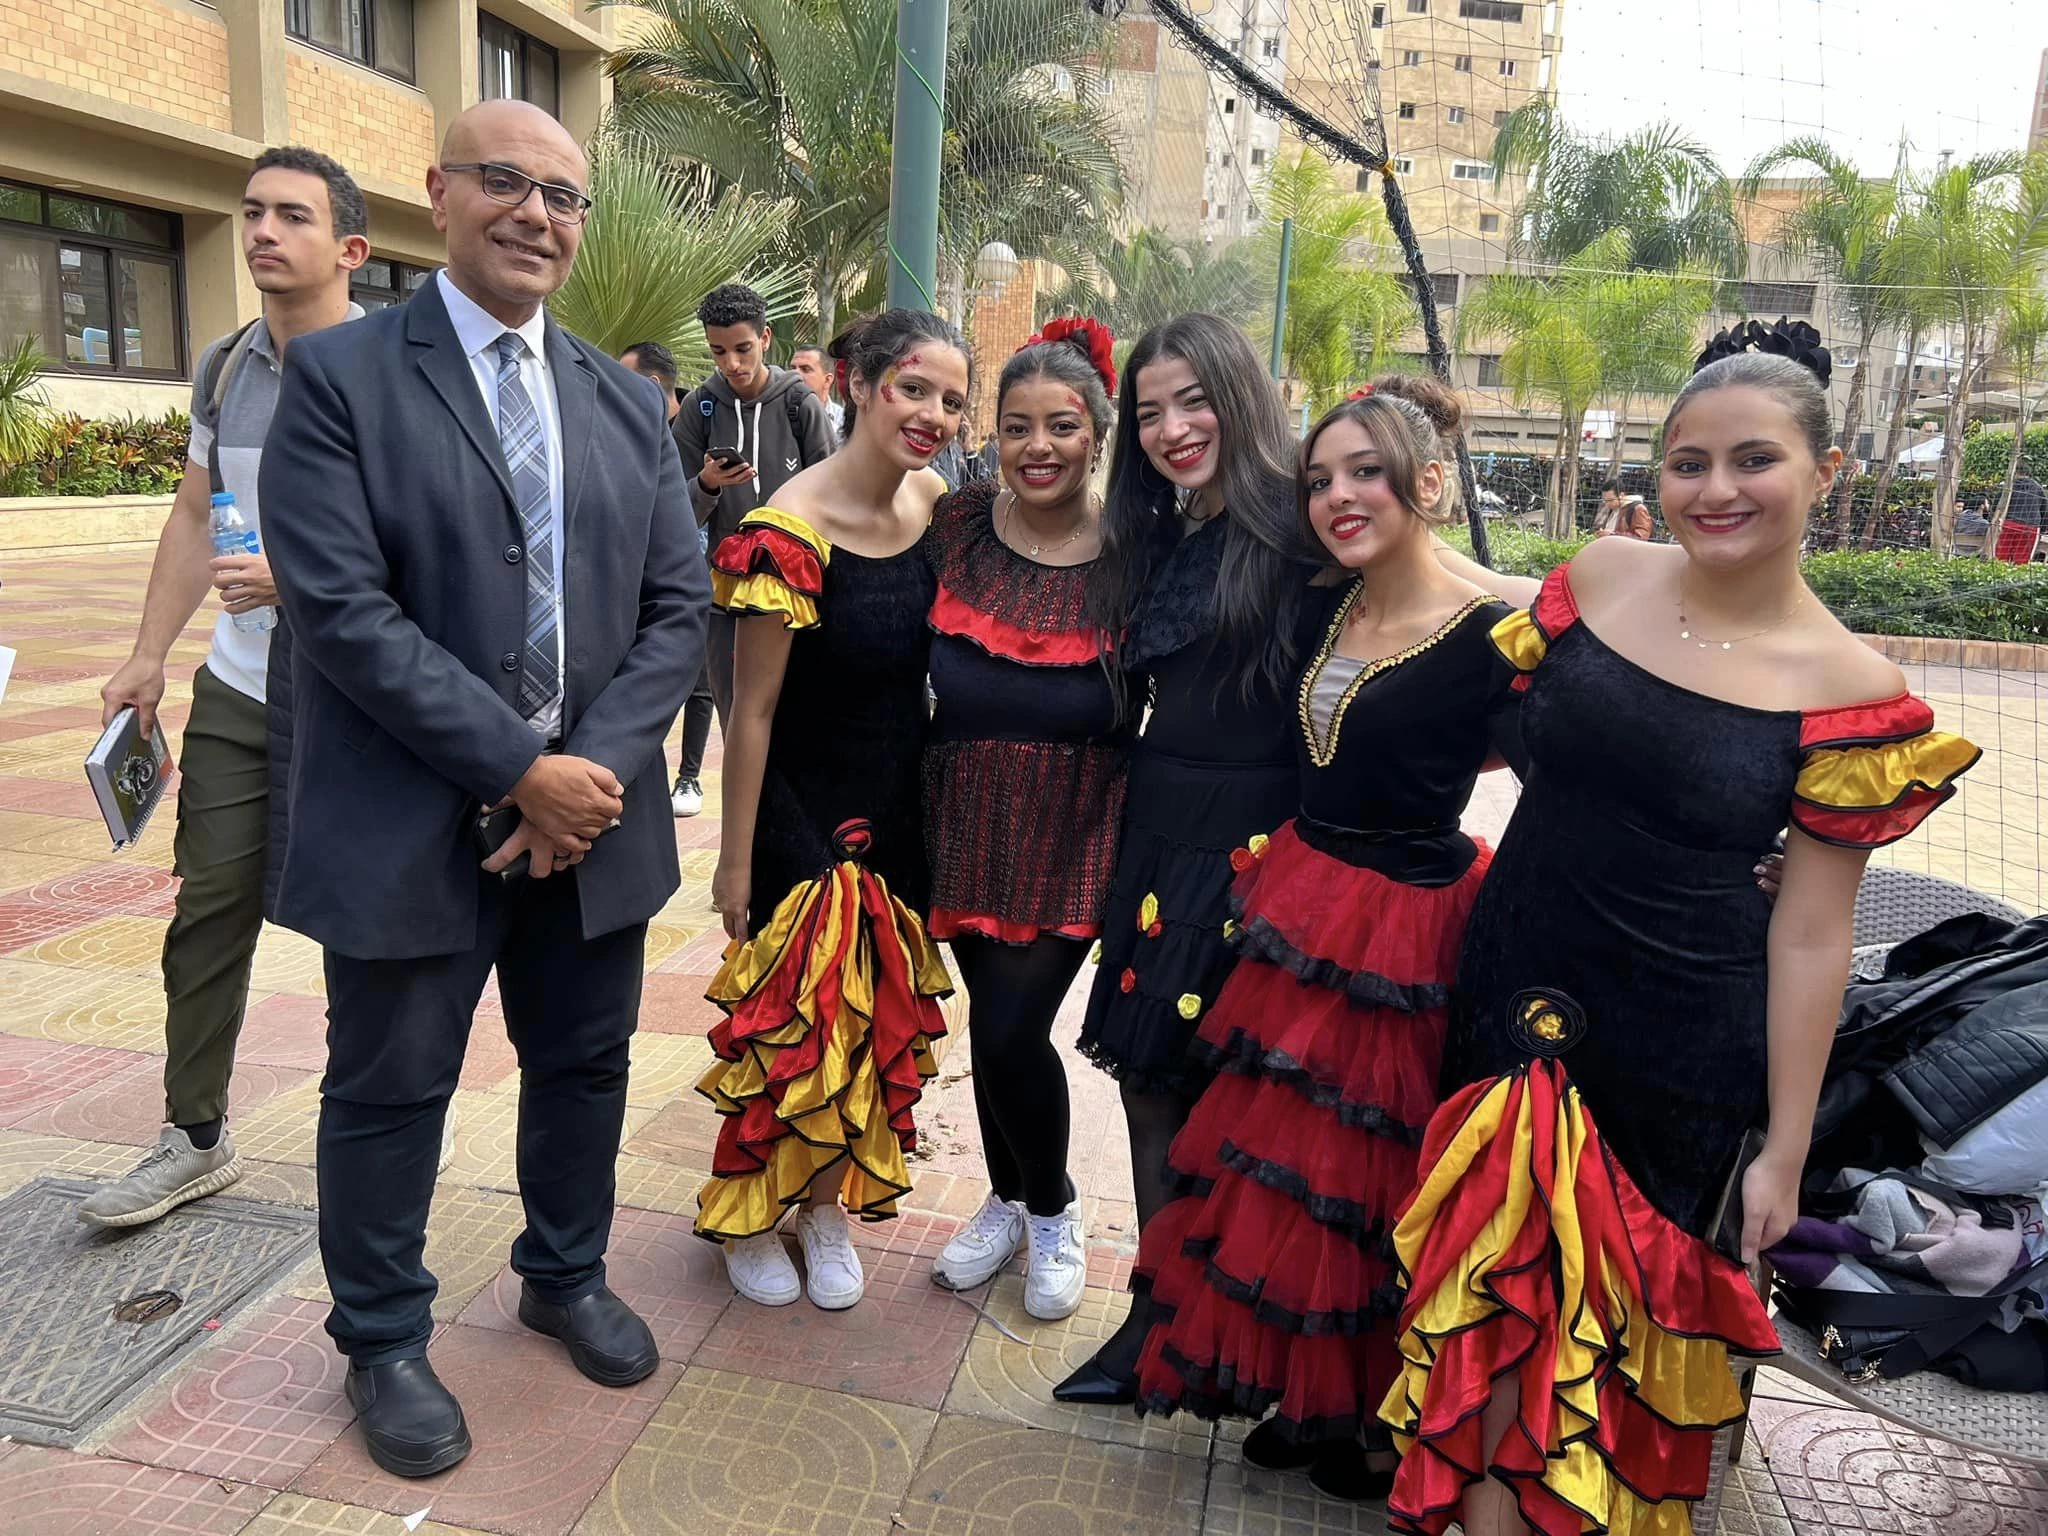 The Department of Cultural and Social Activities in Babi Qir organized an Intercultural Day for students of the College of Language and Media, including performances from various countries about the years of struggle of those peoples on: 12/25/20233